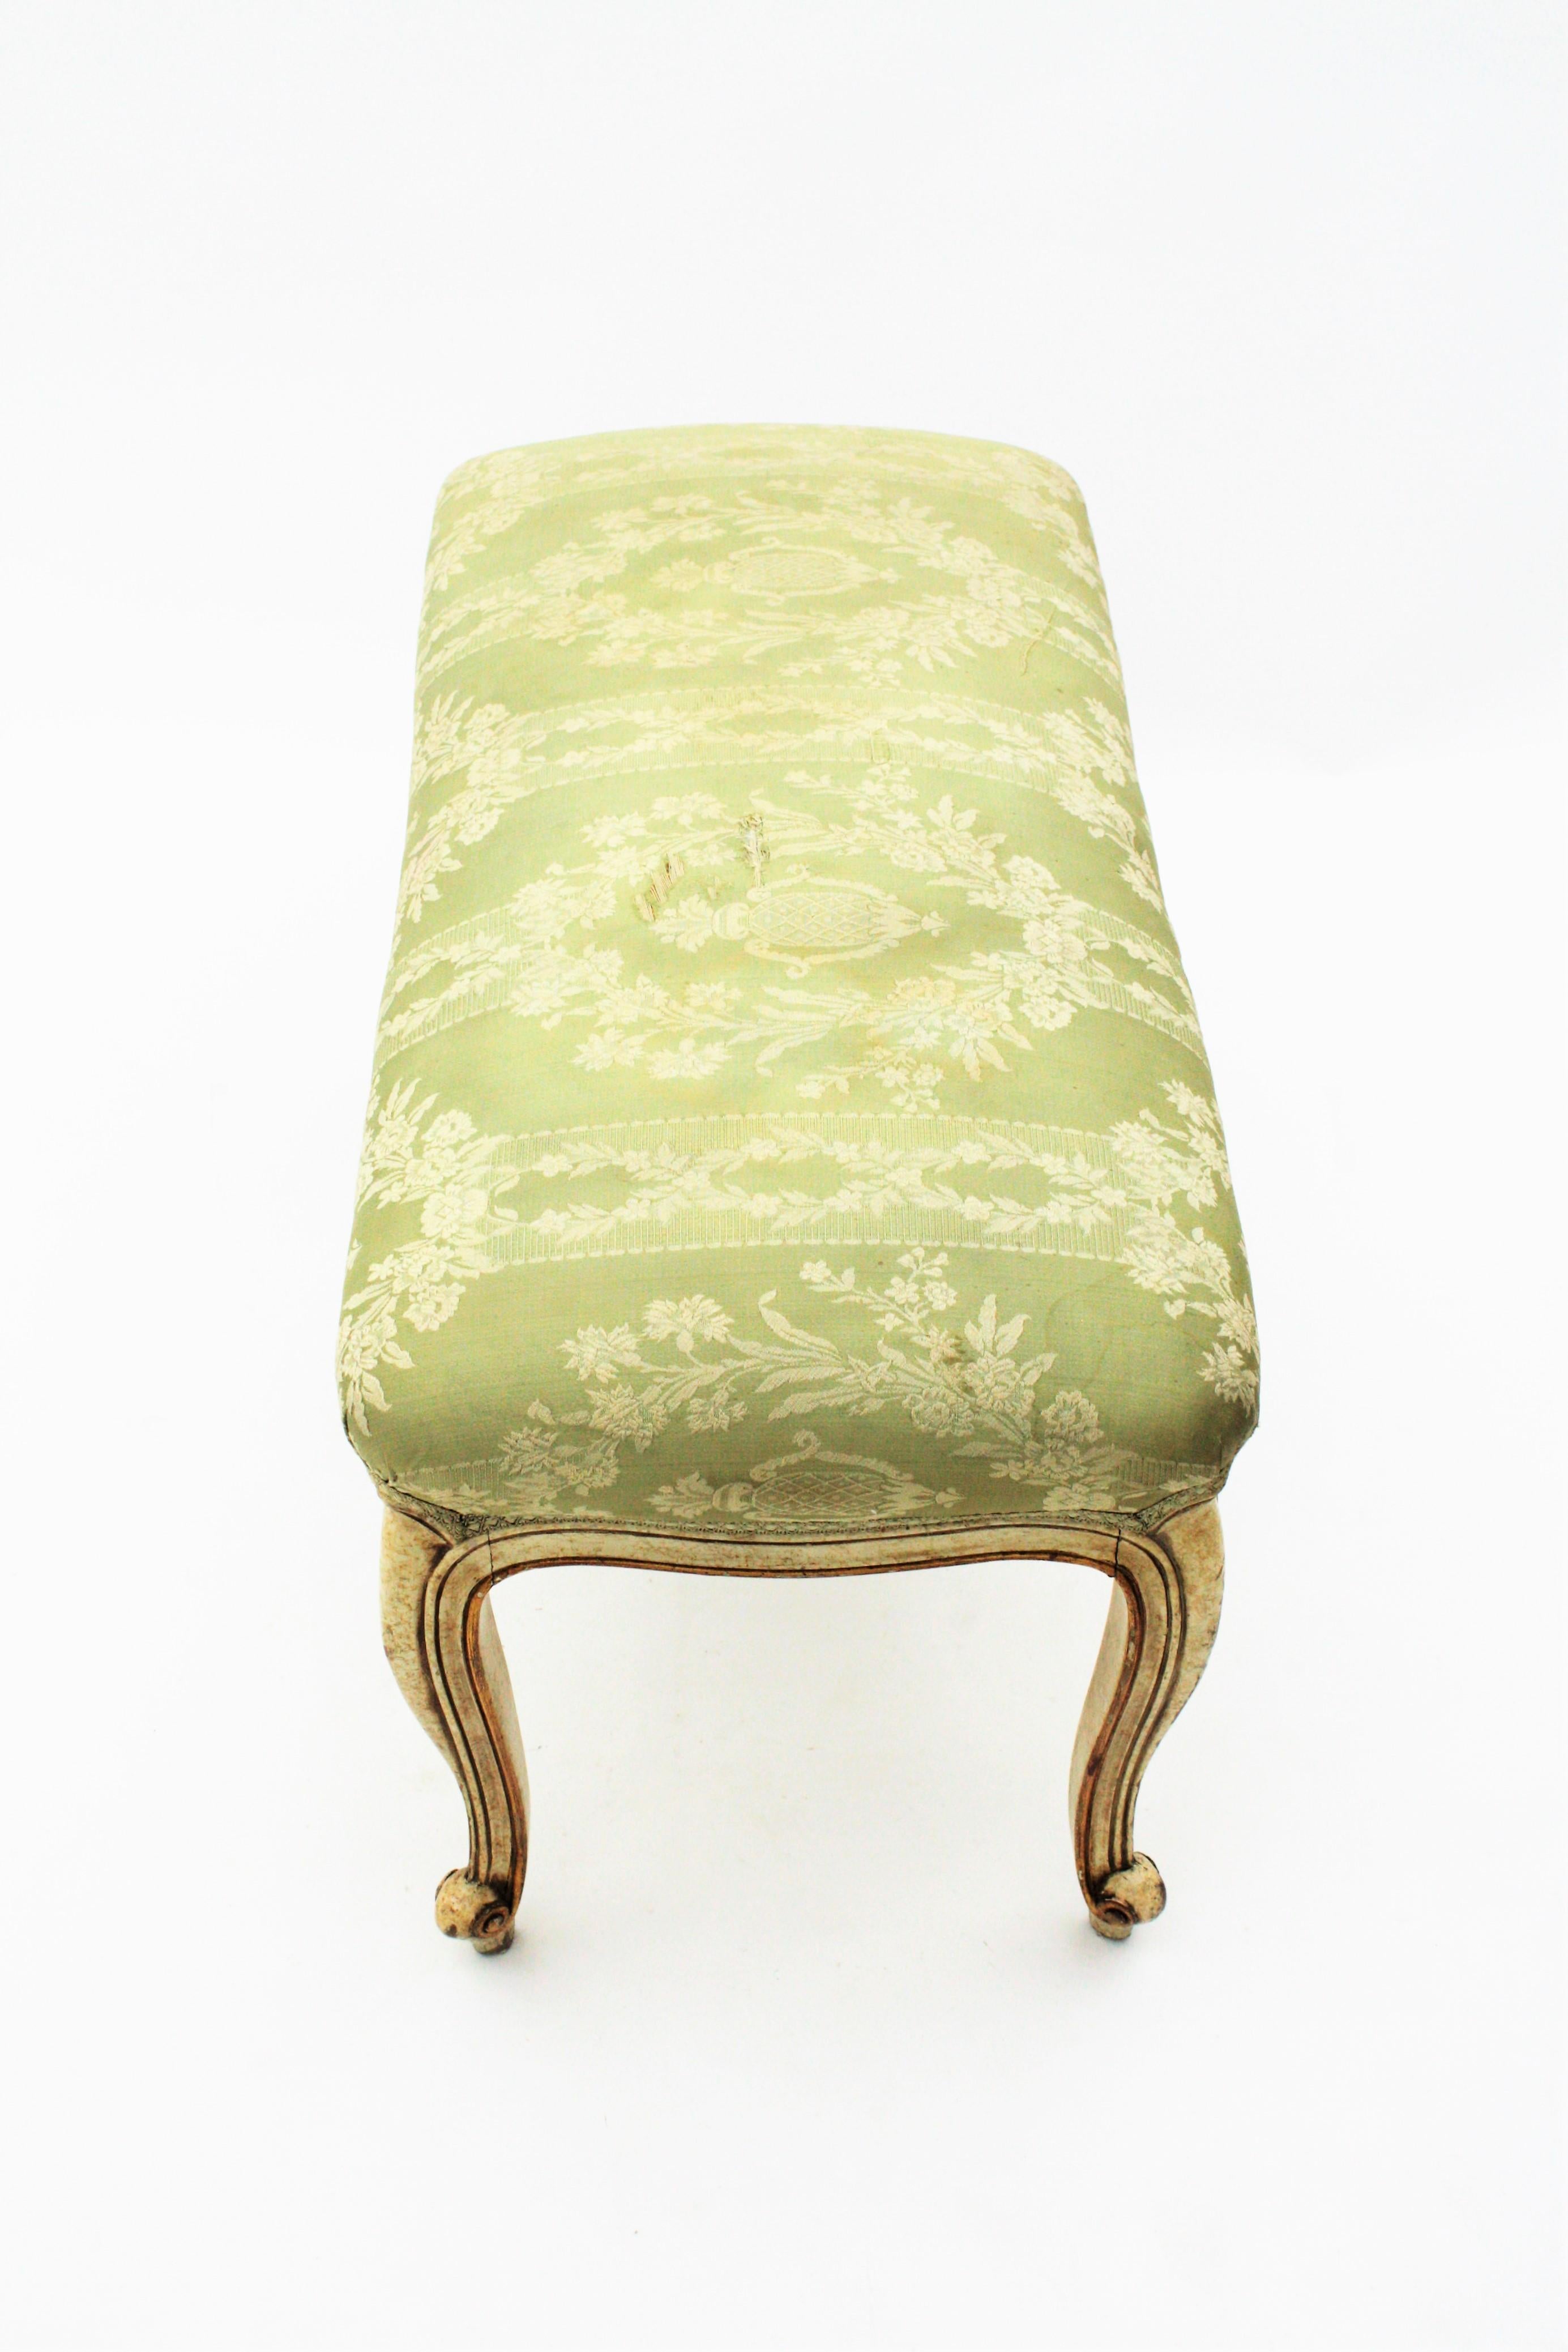 French Louis XV Style Parcel-Gilt Carved Wood Ivory Painted Bench / Stool 10